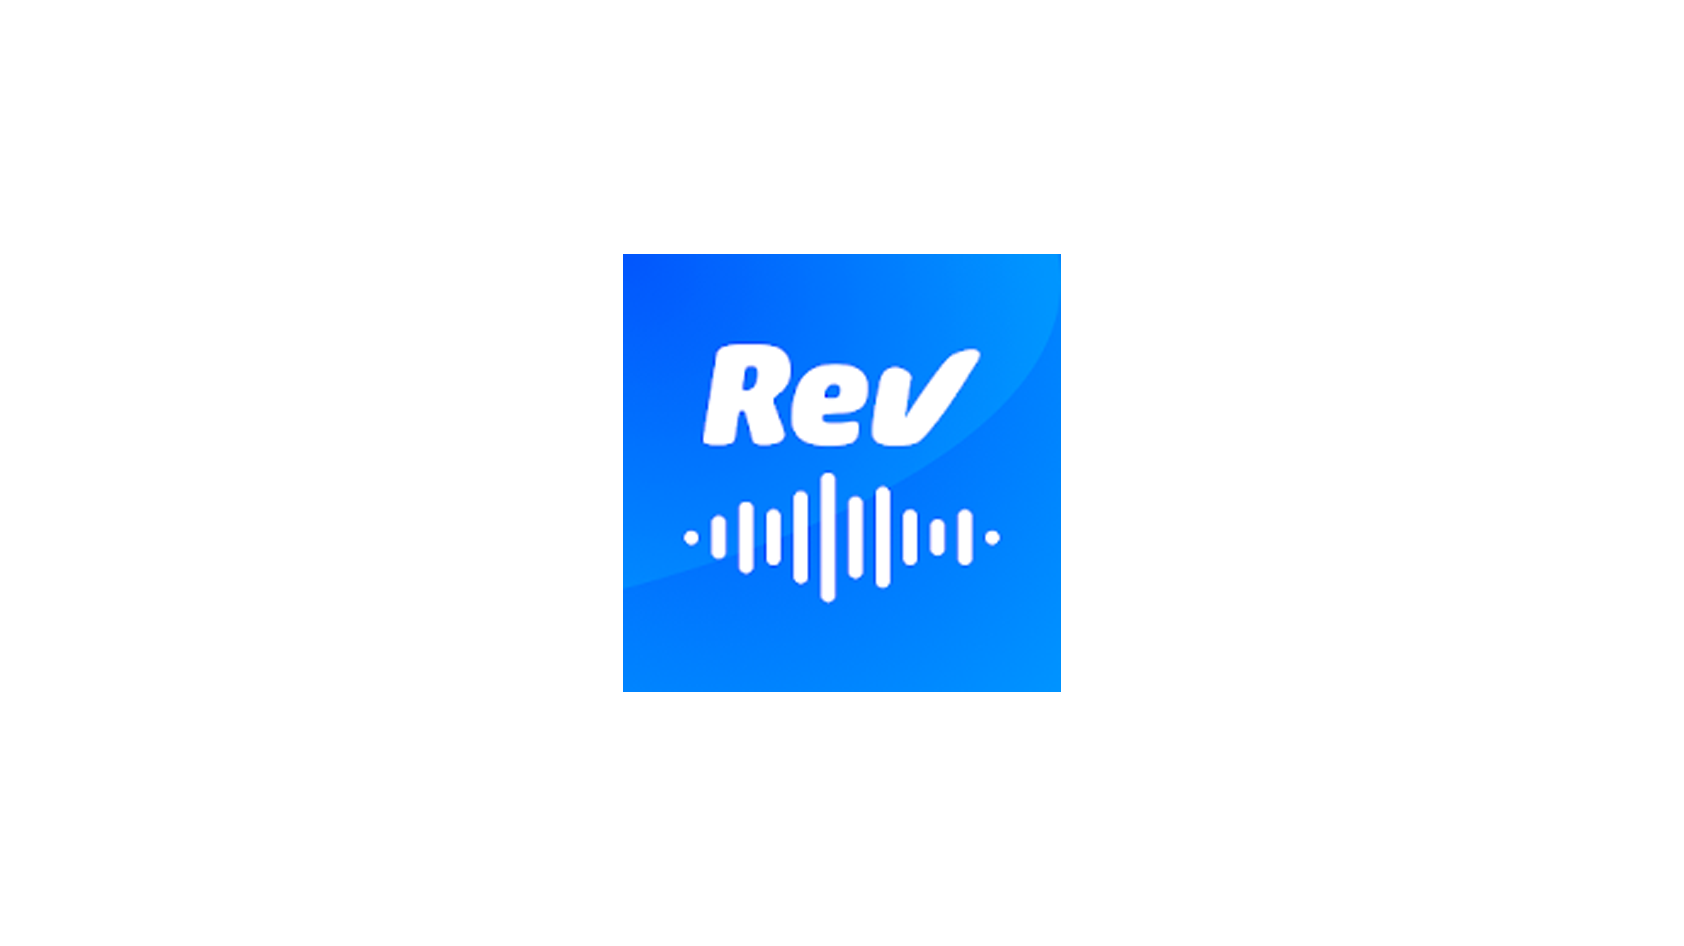 The Rev Voice Recorder logo (blue) against a white background.